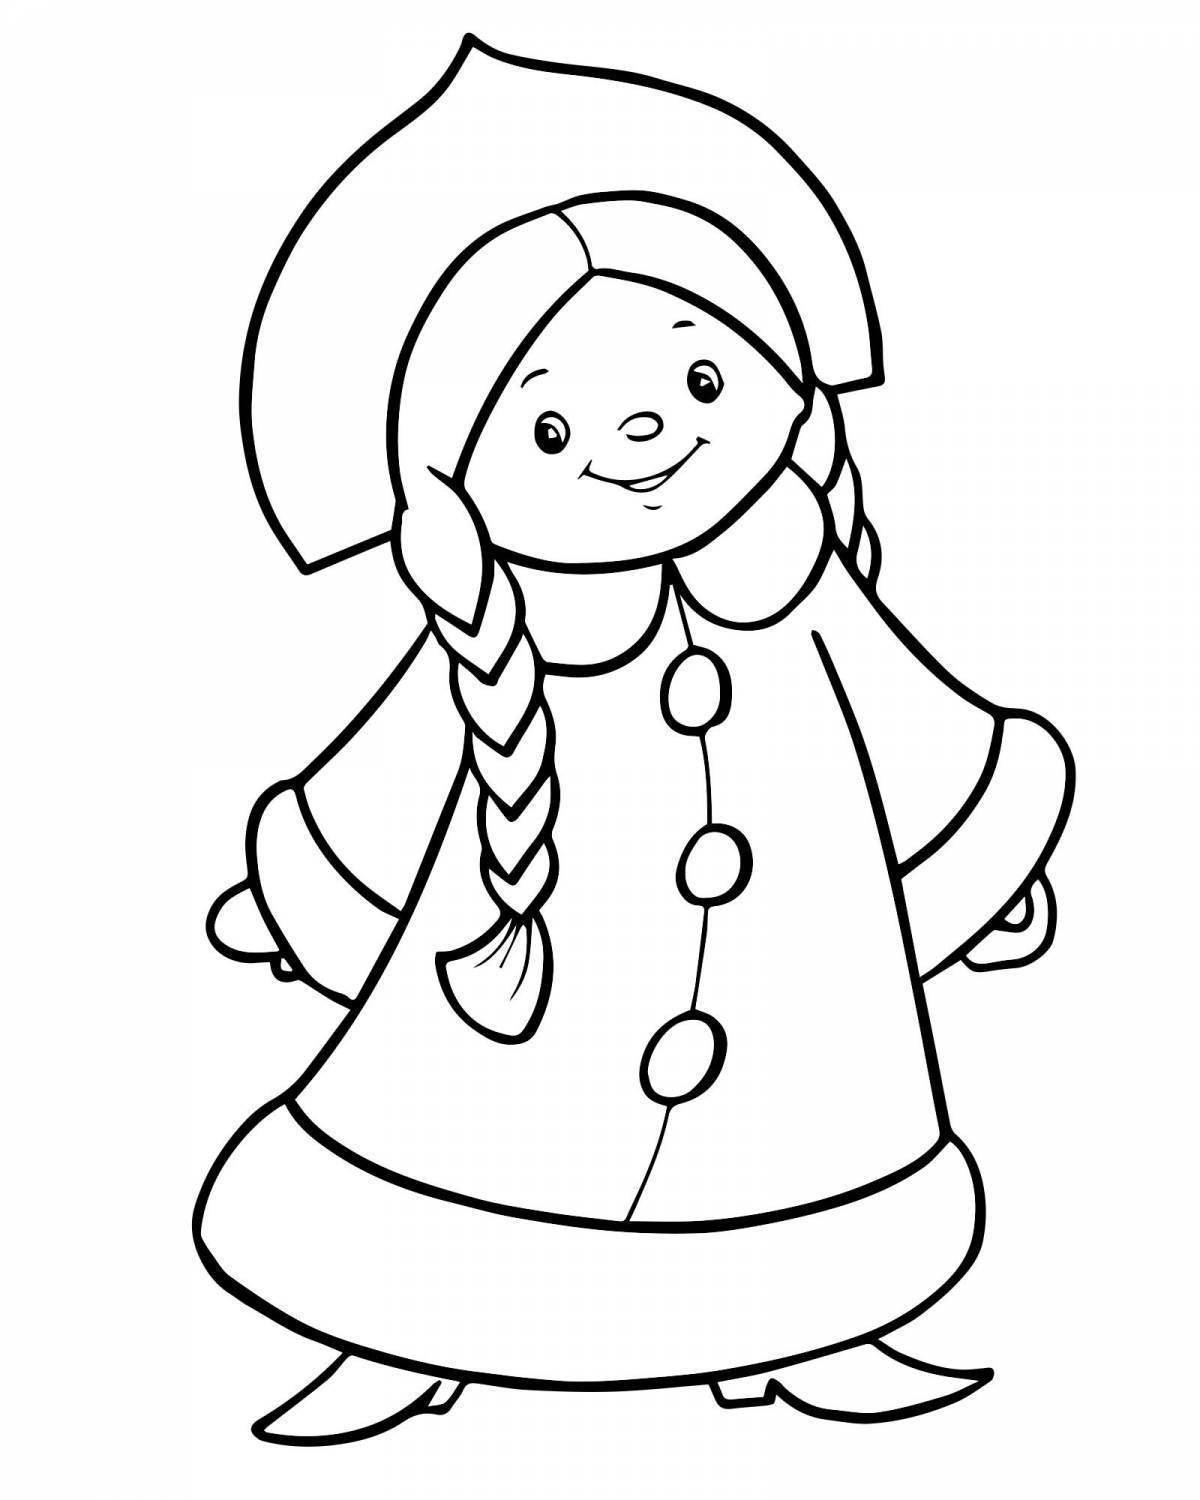 Dazzling snow maiden coloring book